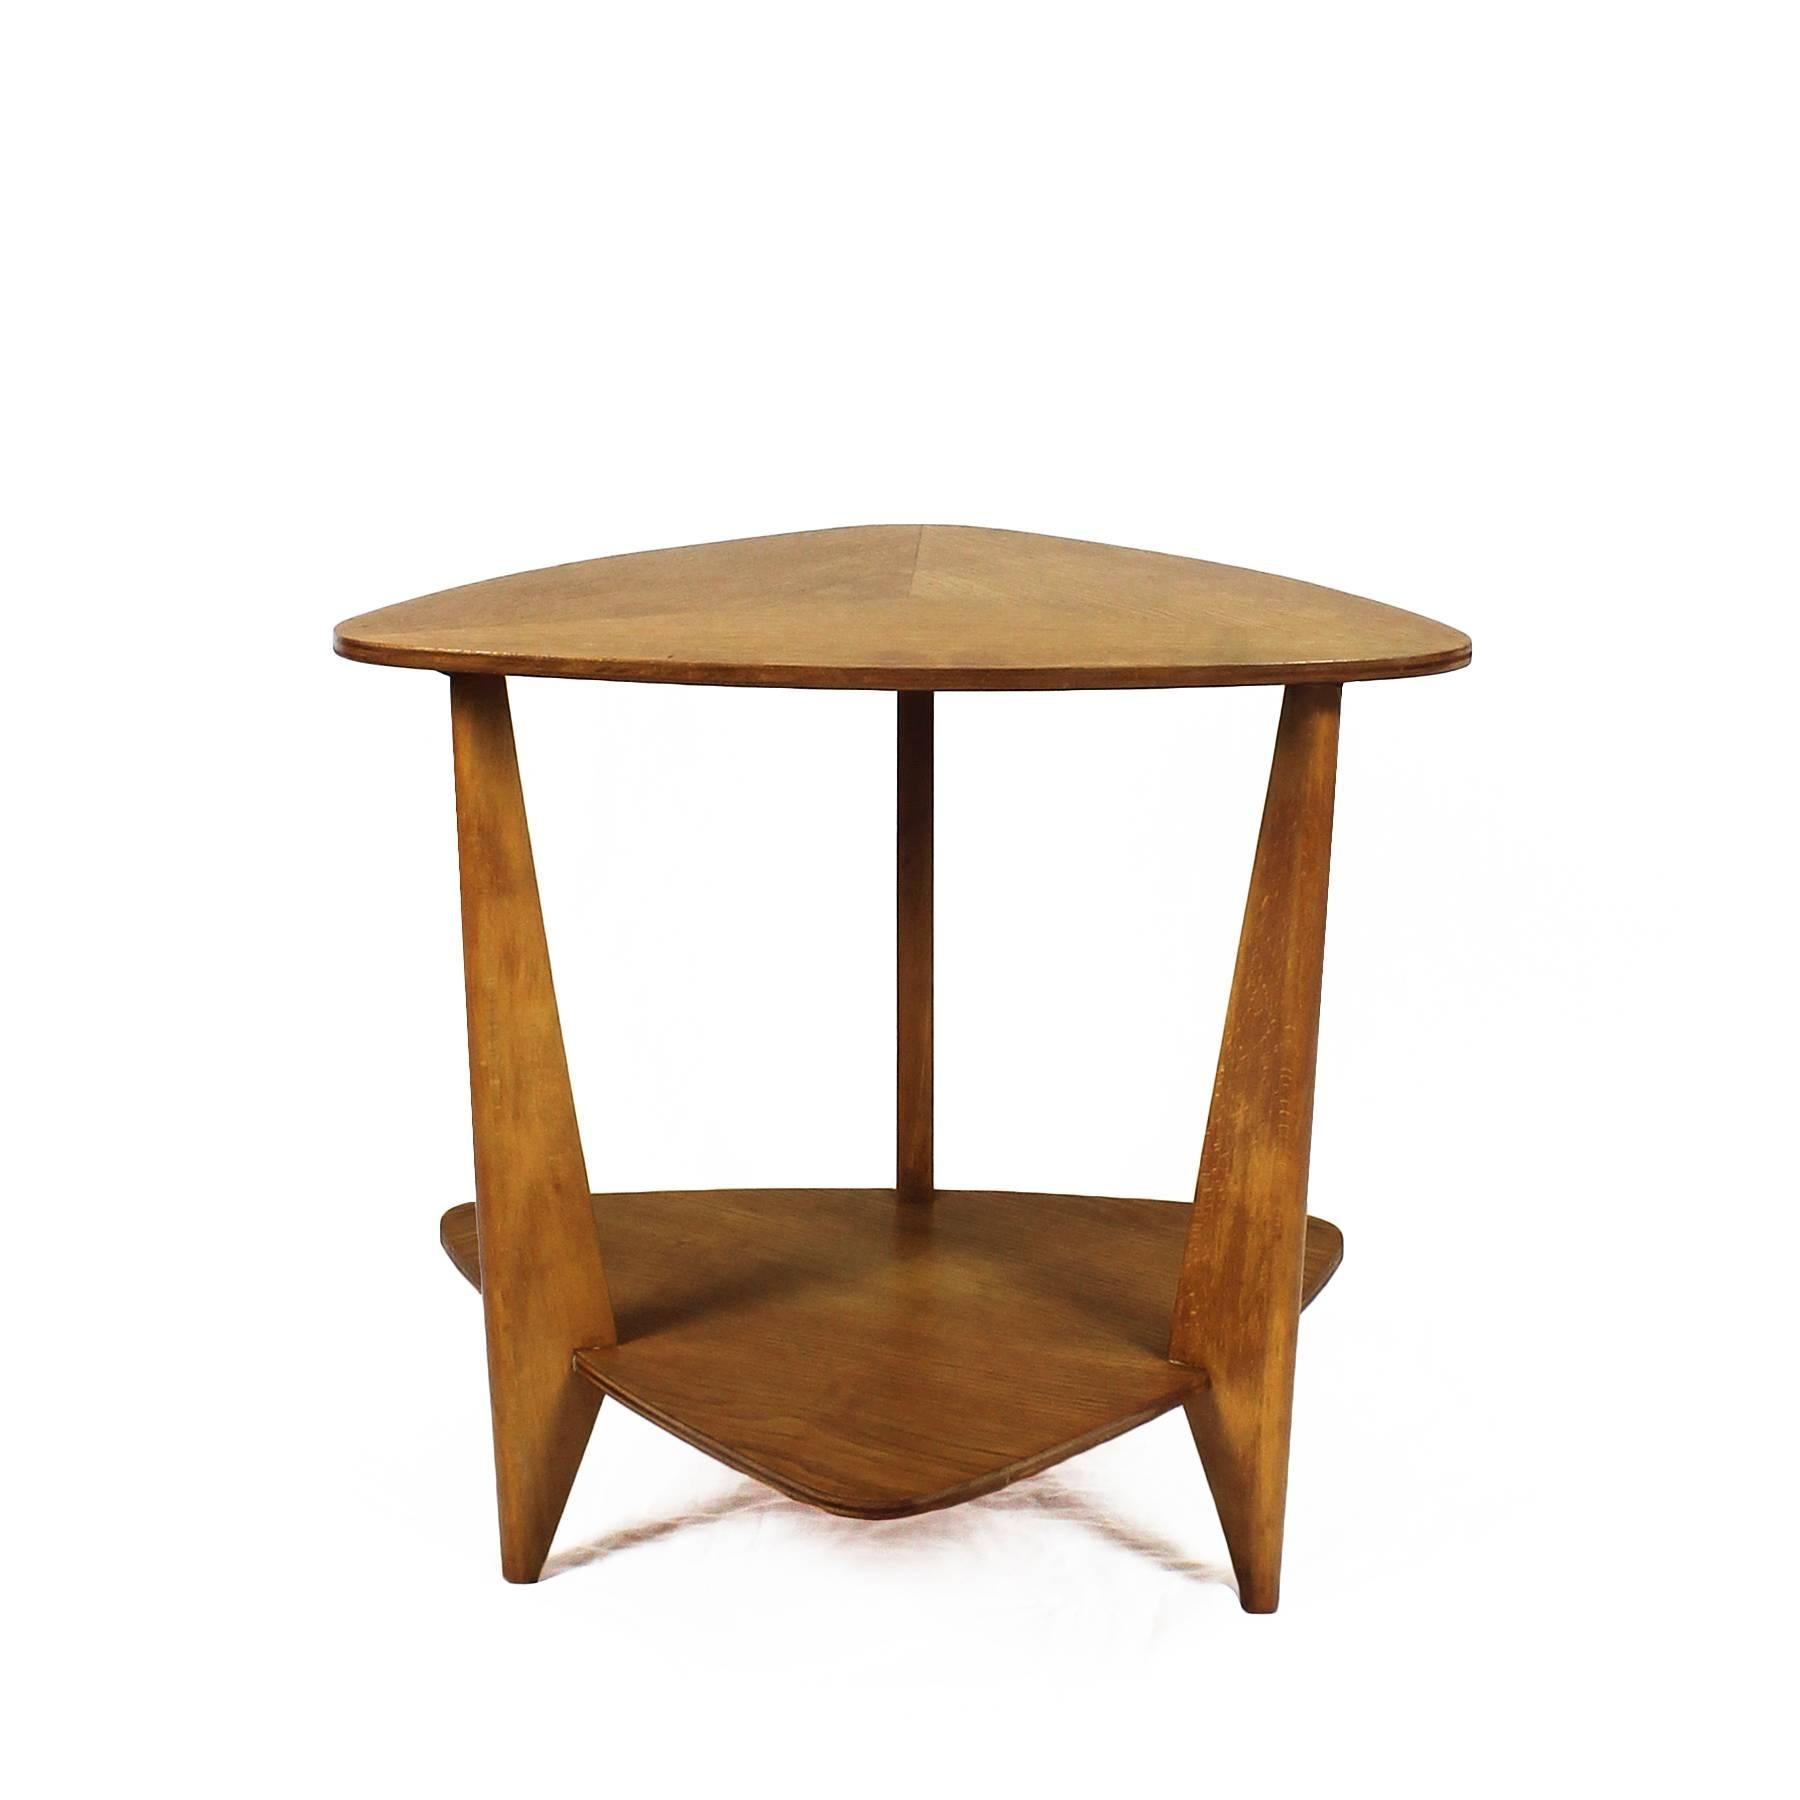 Samll tripod table in solid oak and oak veneer, two triangular levels, the top one with triangular marquetry, satiny barnished,

France, circa 1950.